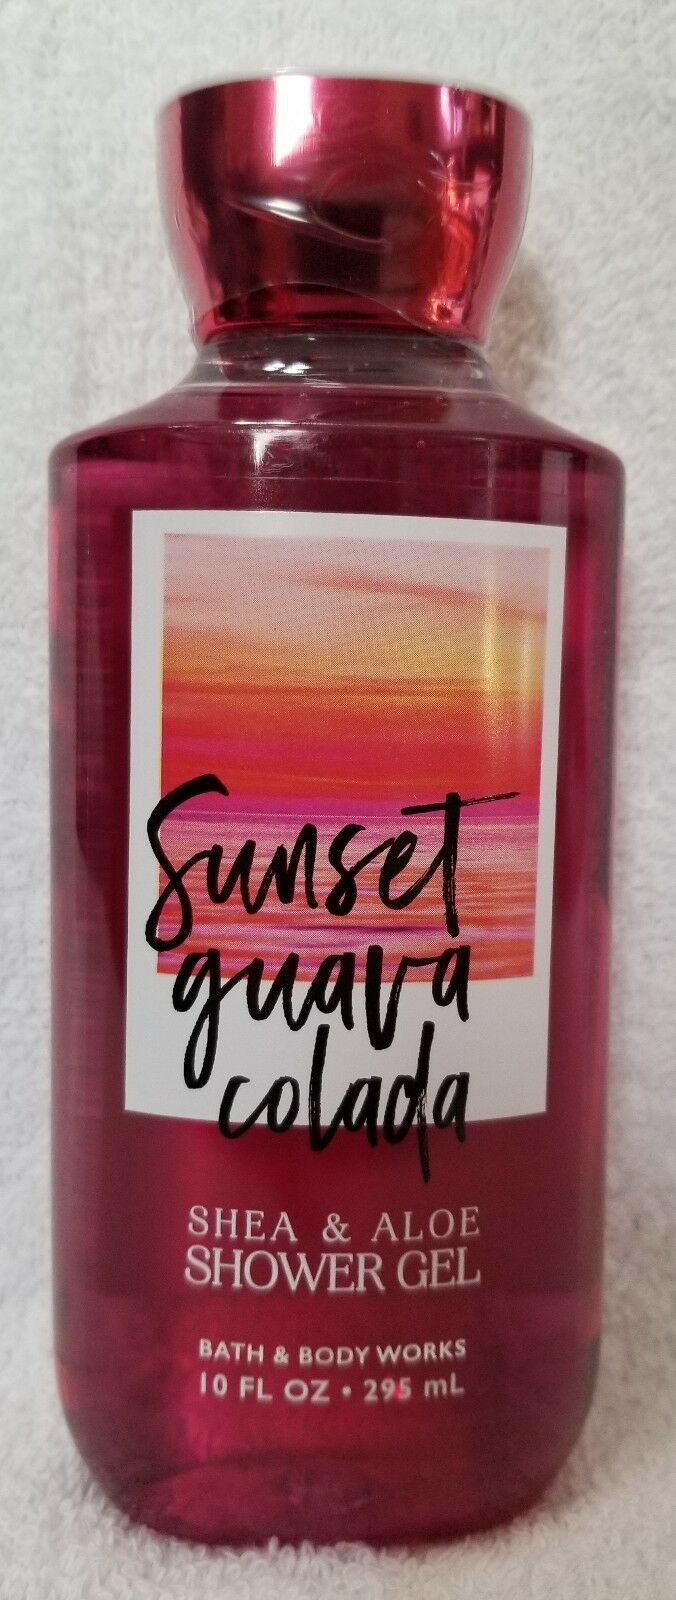 Primary image for Bath & Body Works SUNSET GUAVA COLADA Shea & Aloe Shower Gel 10 oz/295mL New